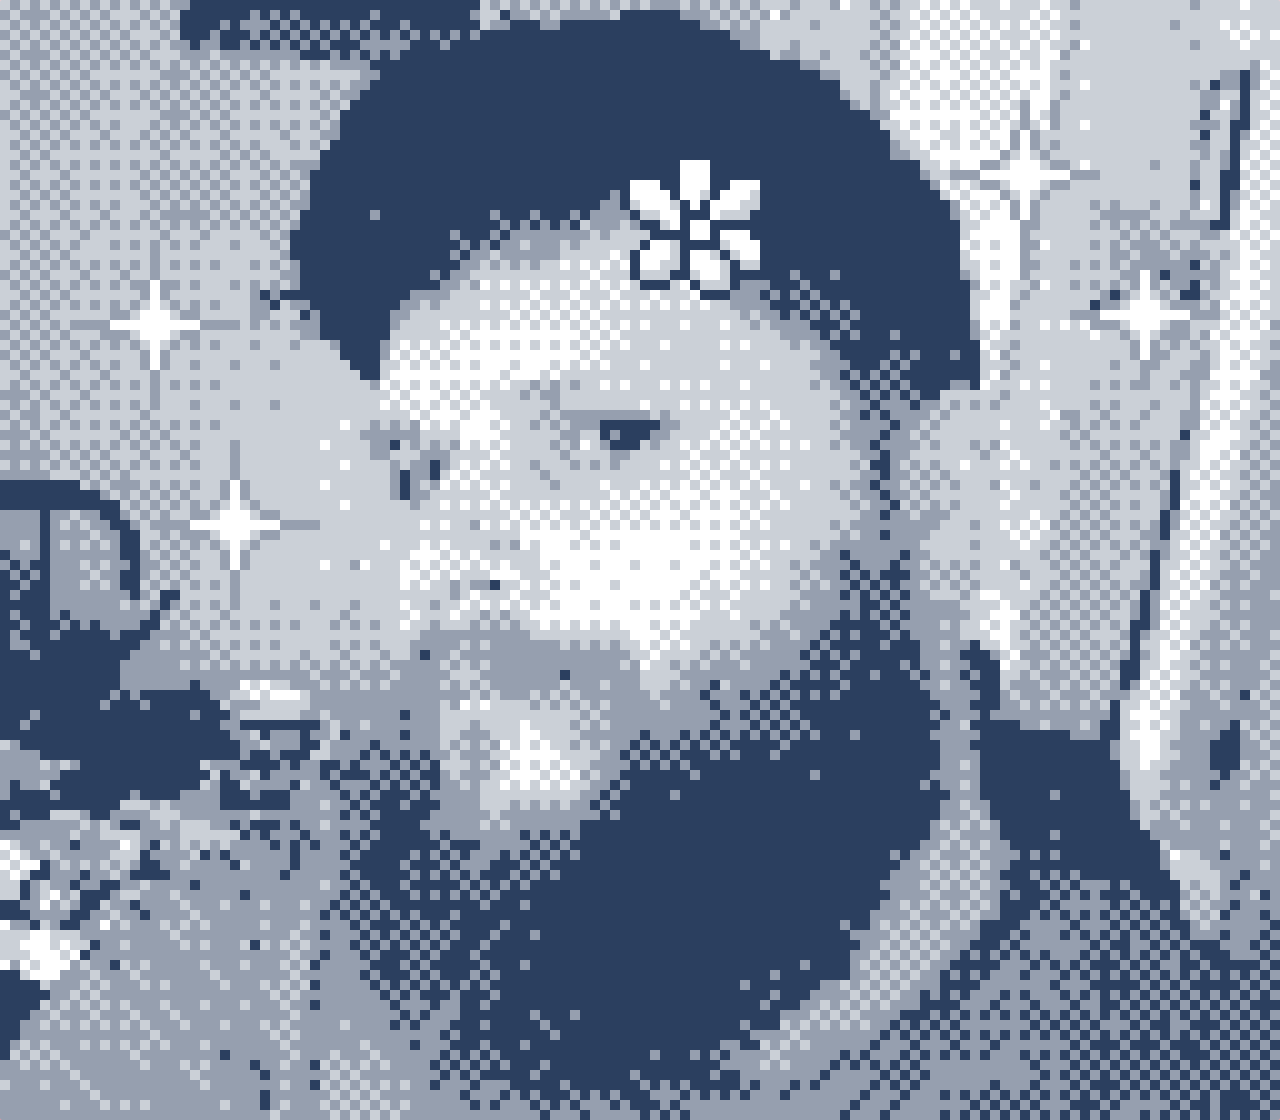 A low-resolution picture of me, a white 30-year-old man with a beard and short hair. It was taken using a Game Boy Camera, so it has a pixelated look and uses only four shades of grey. Stamps of sparkles and flowers have been added using the Game Boy Camera.